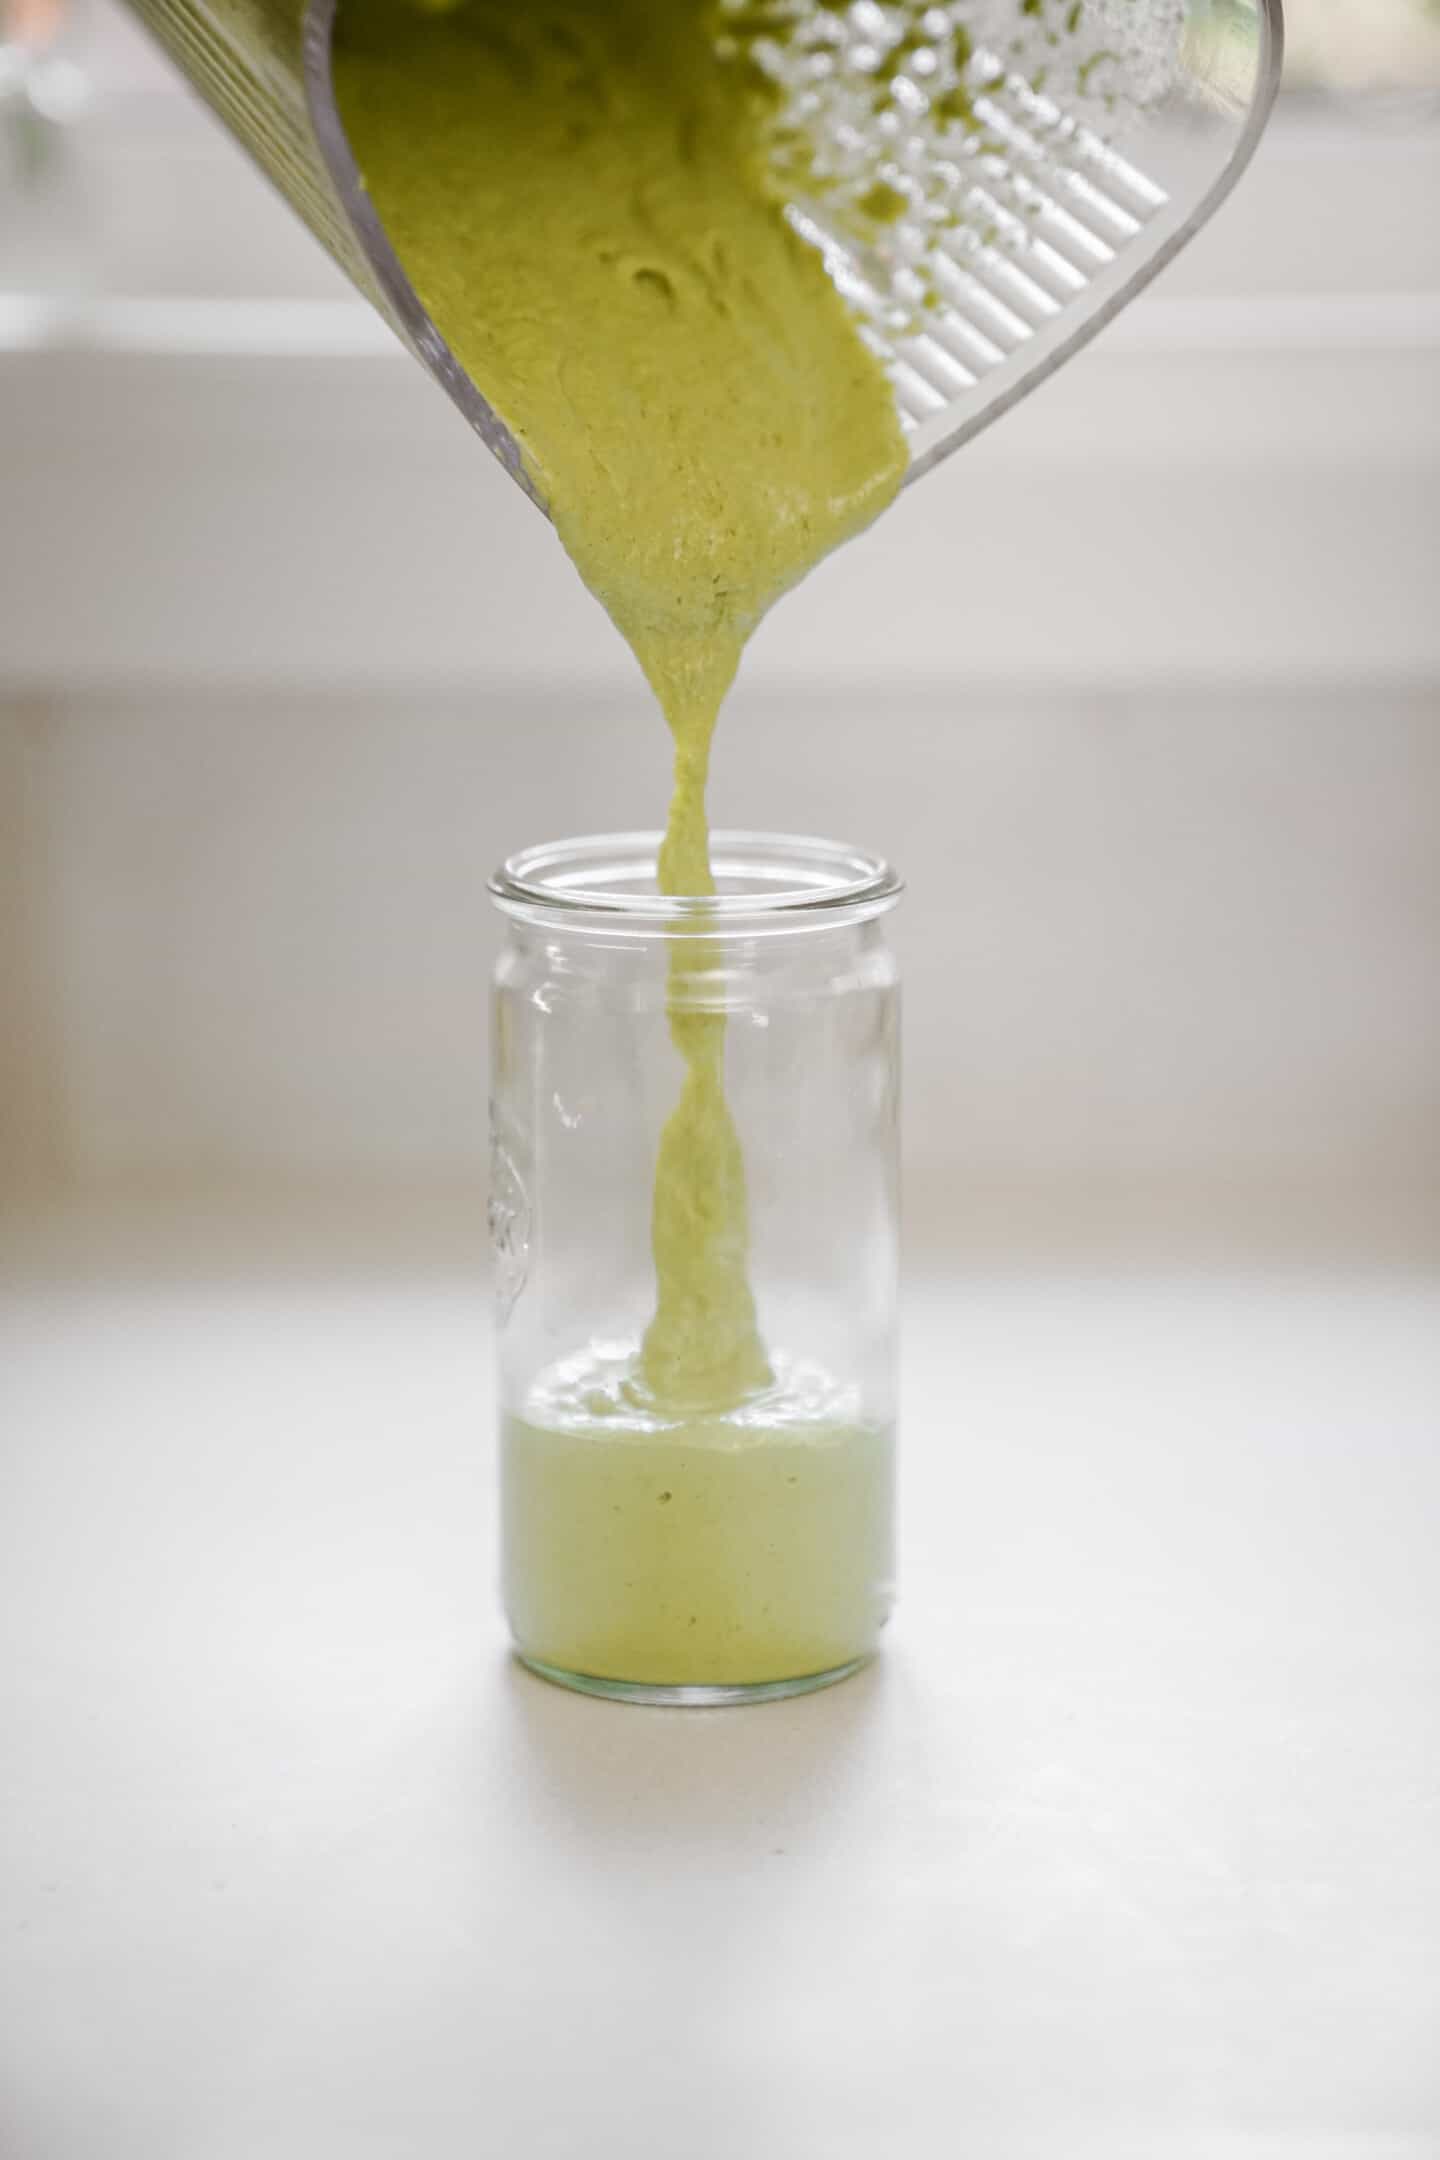 Chimichurri sauce being poured into a jar